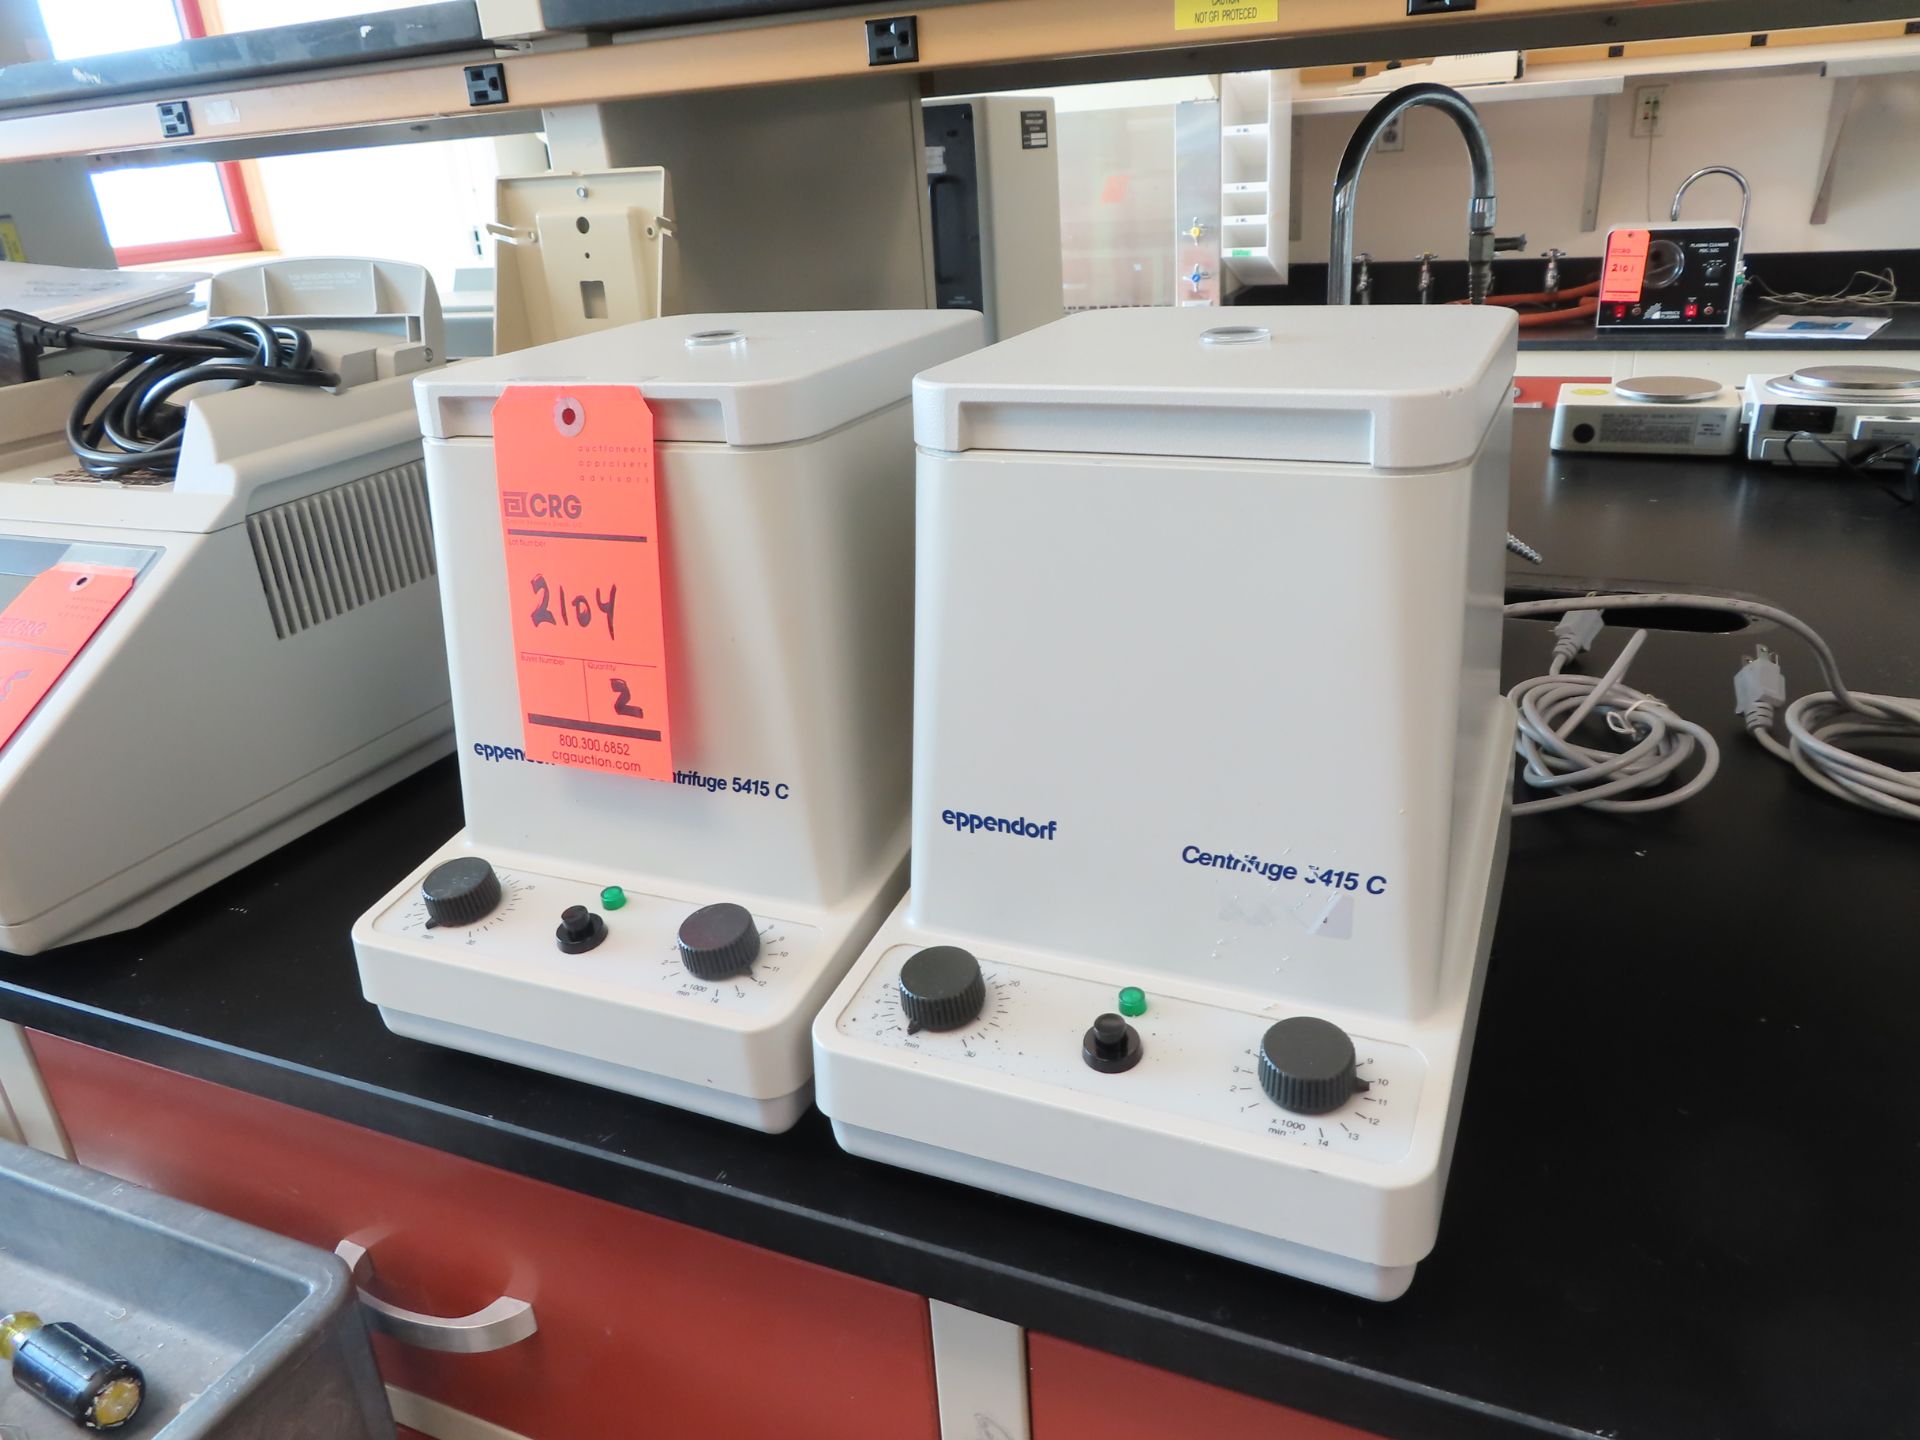 Lot of (2) eppendorf 5415C centrifuges, located in D wing, 3rd floor, room 395A